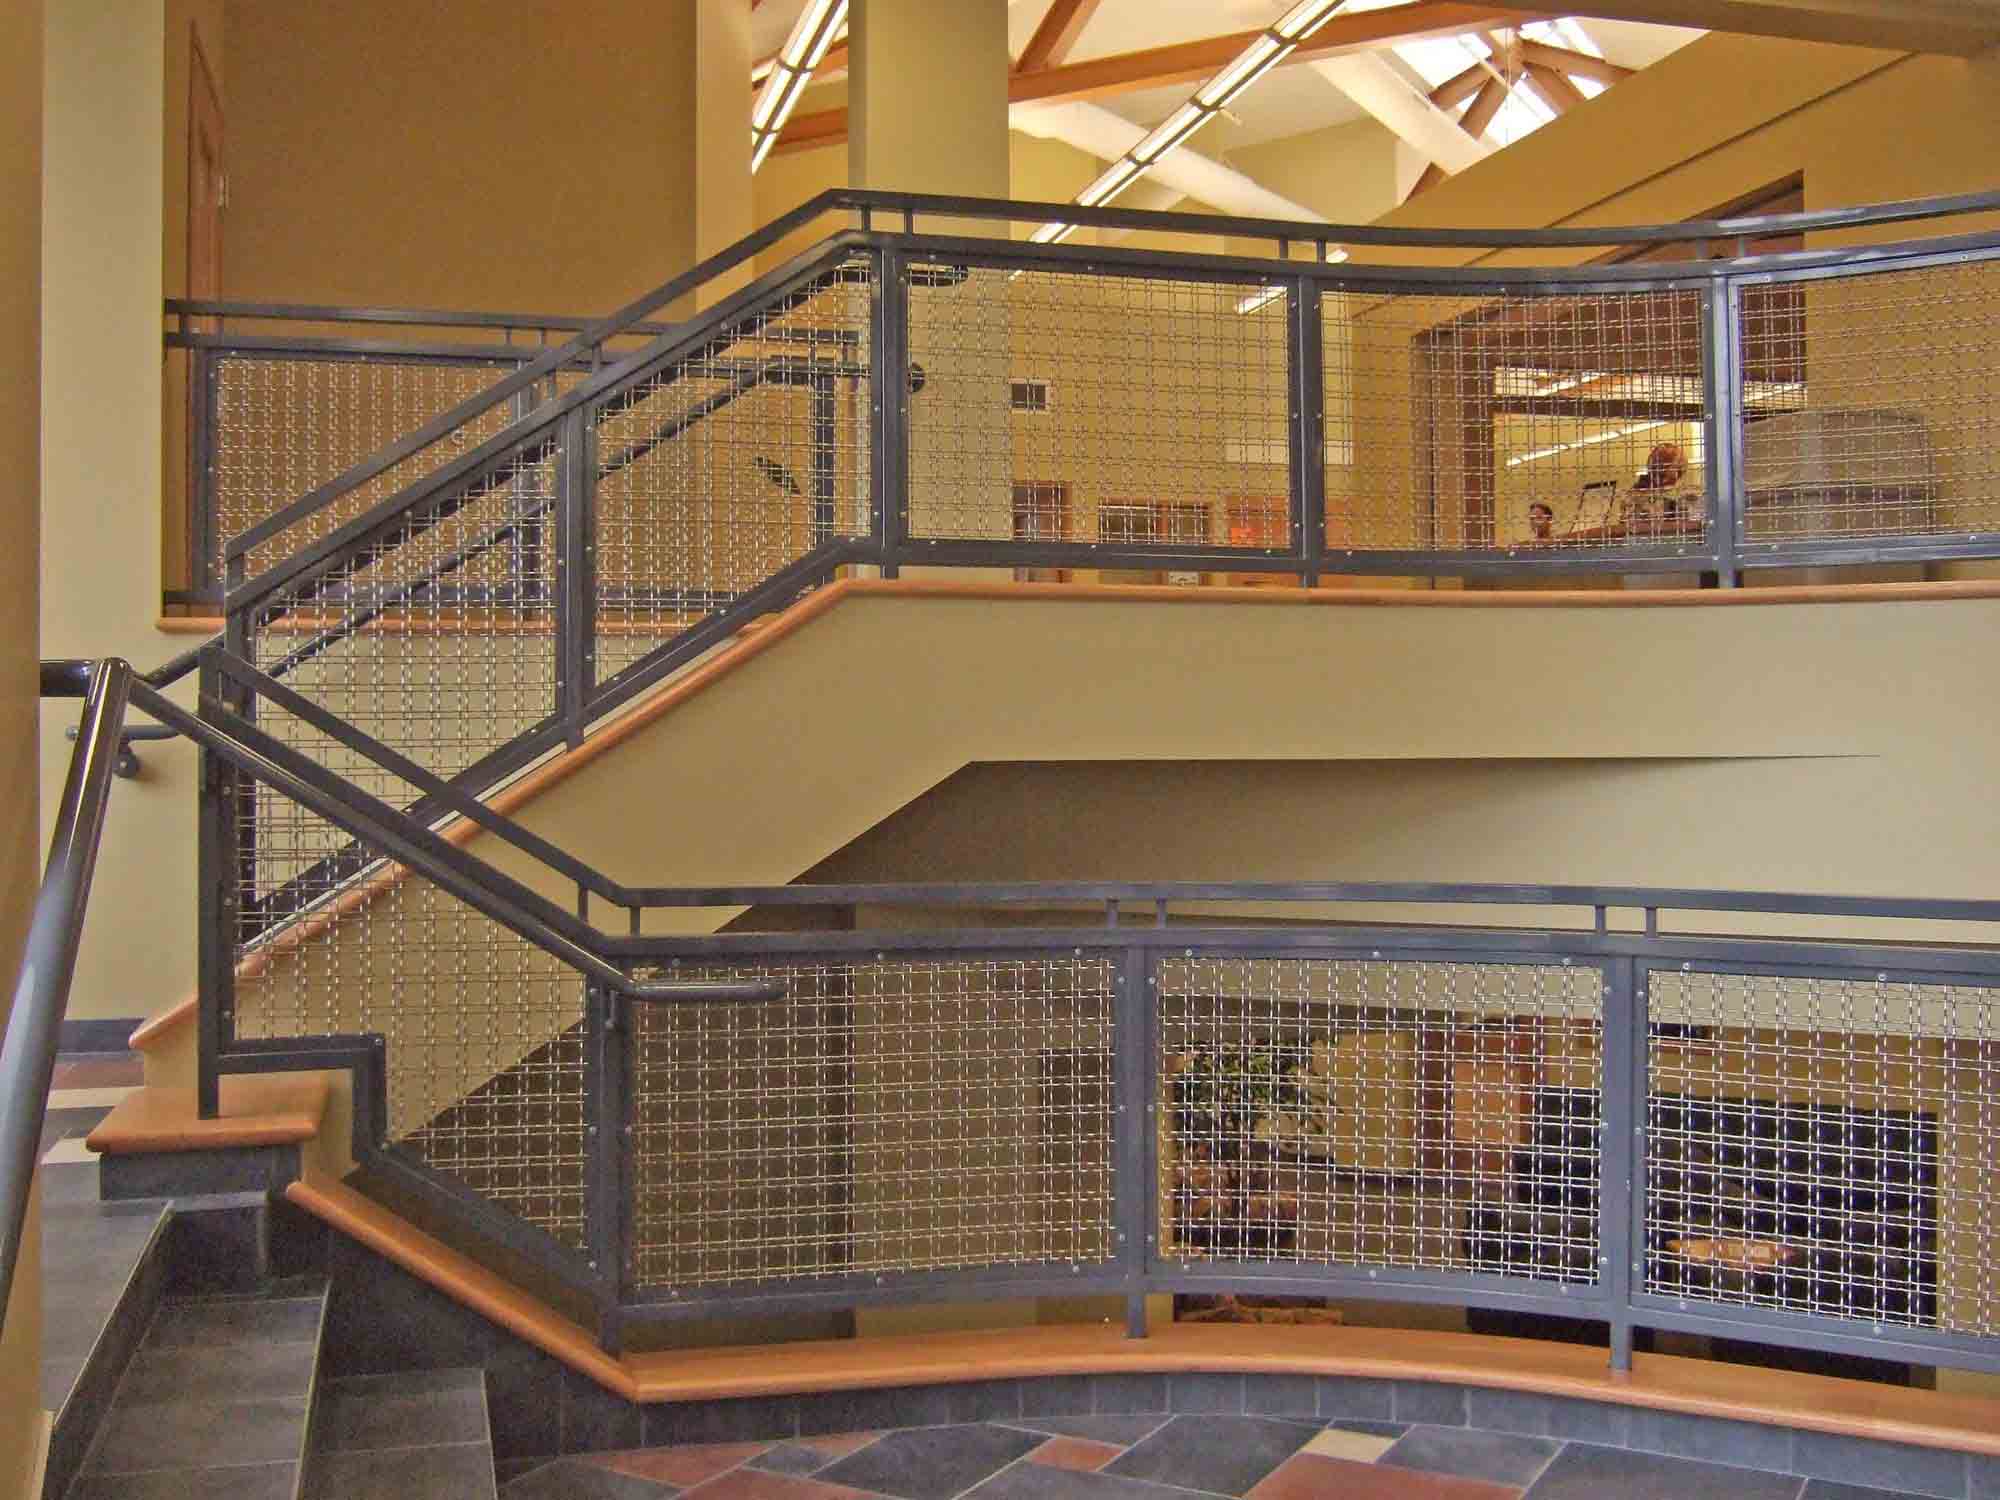 The staircase and railings inside a Walsh University dormitory.